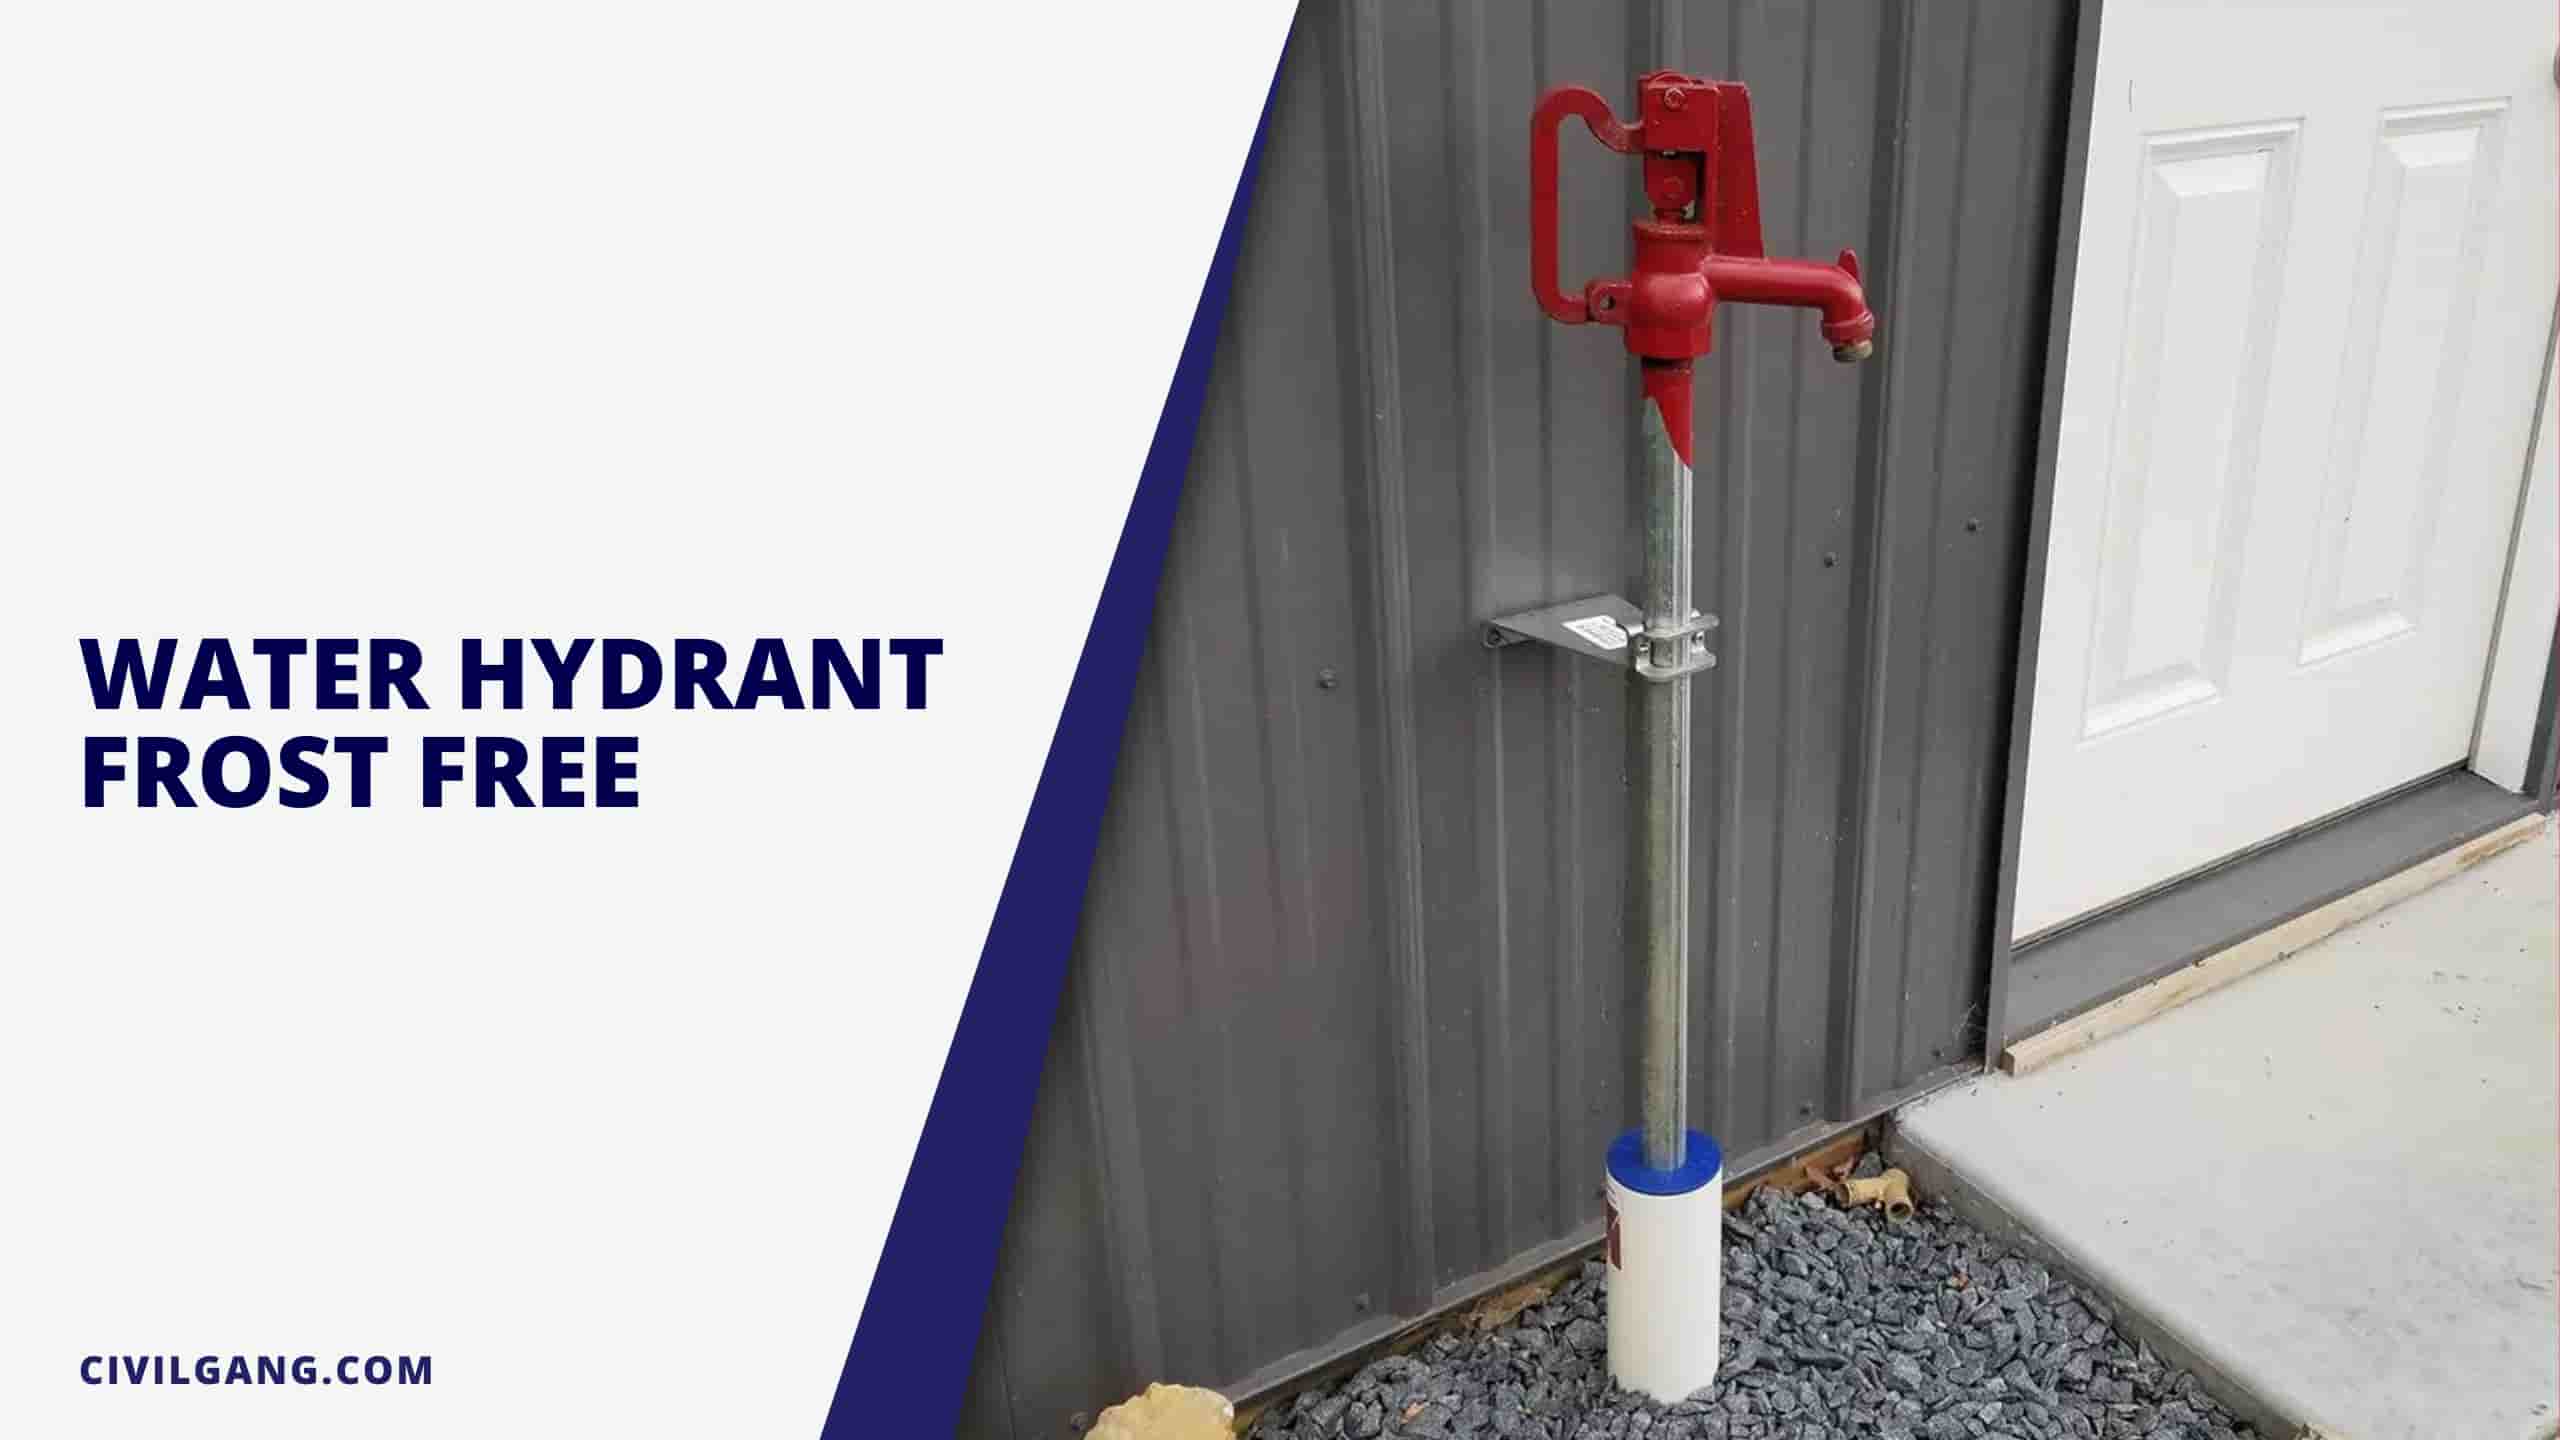 Water Hydrant Frost Free